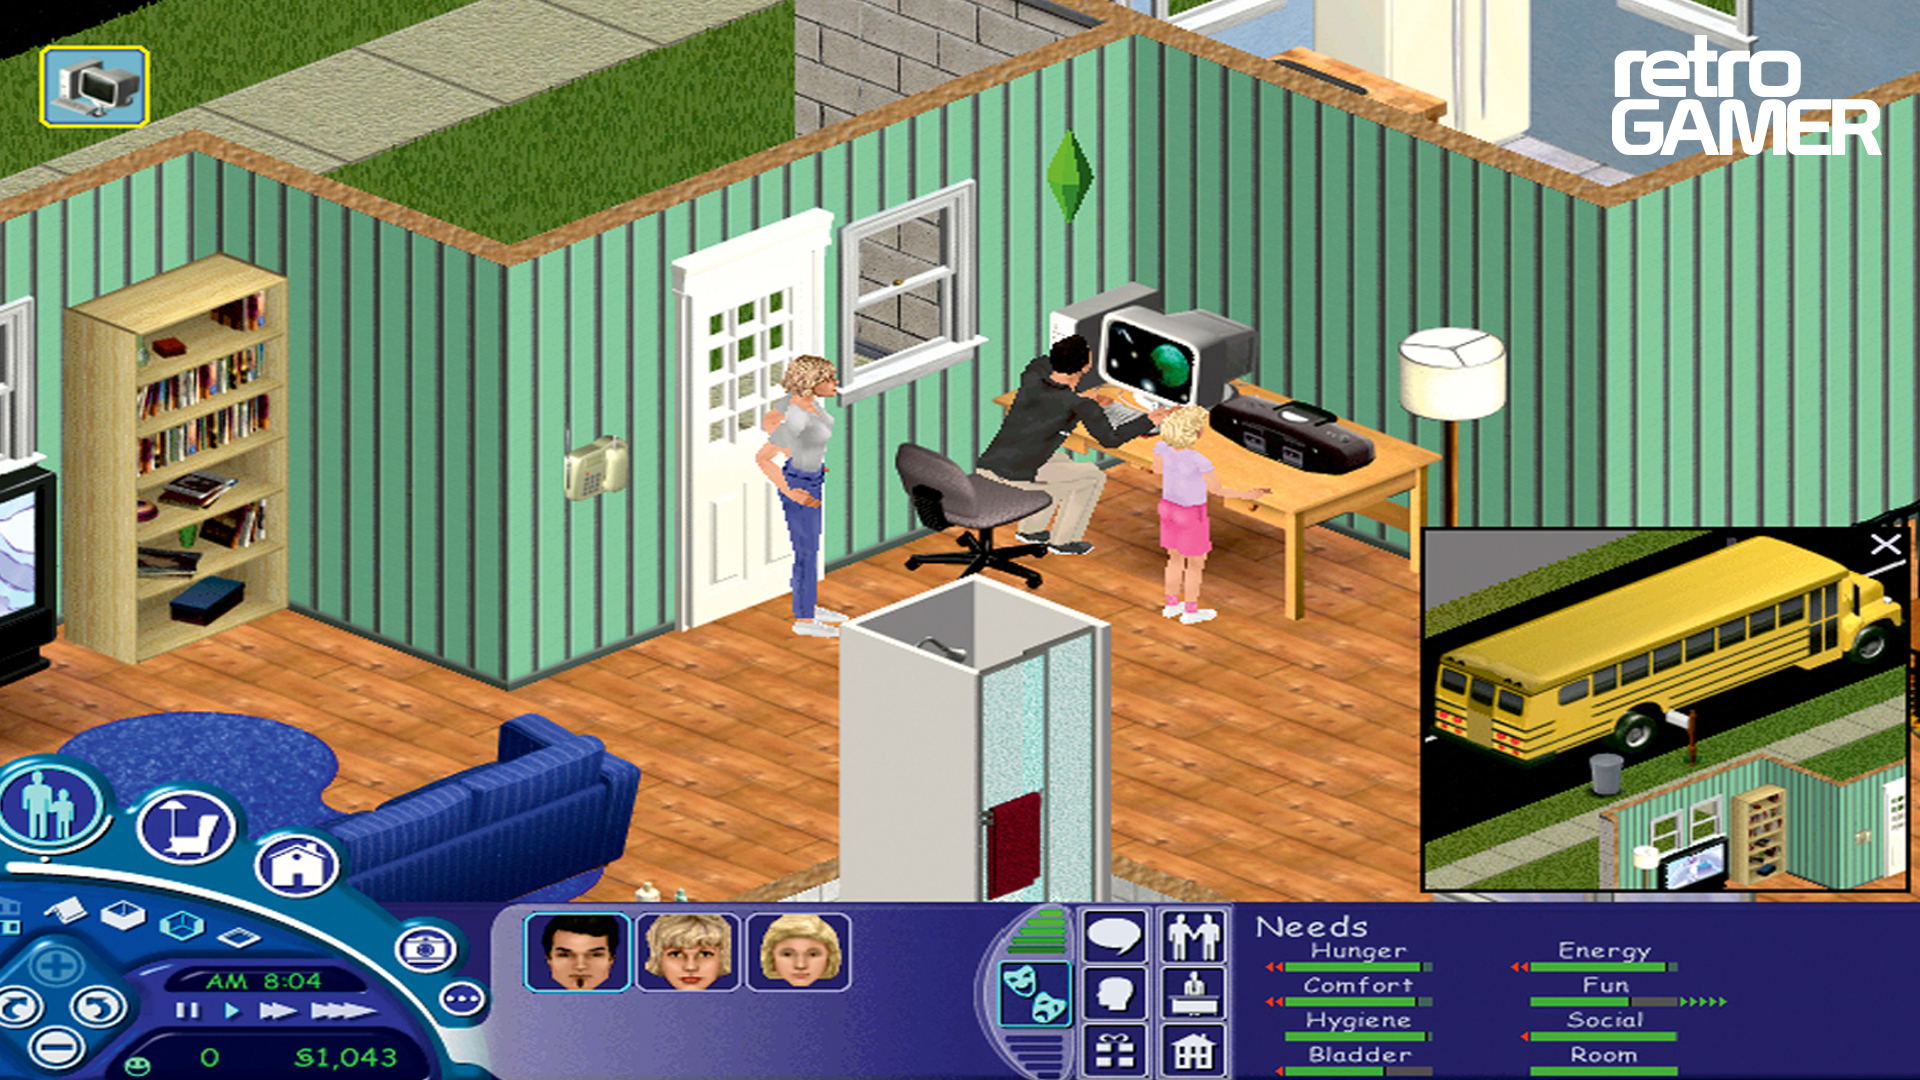 The Sims turns 20: Creator Will Wright reflects on the battle he waged to get one of the best games of all time made